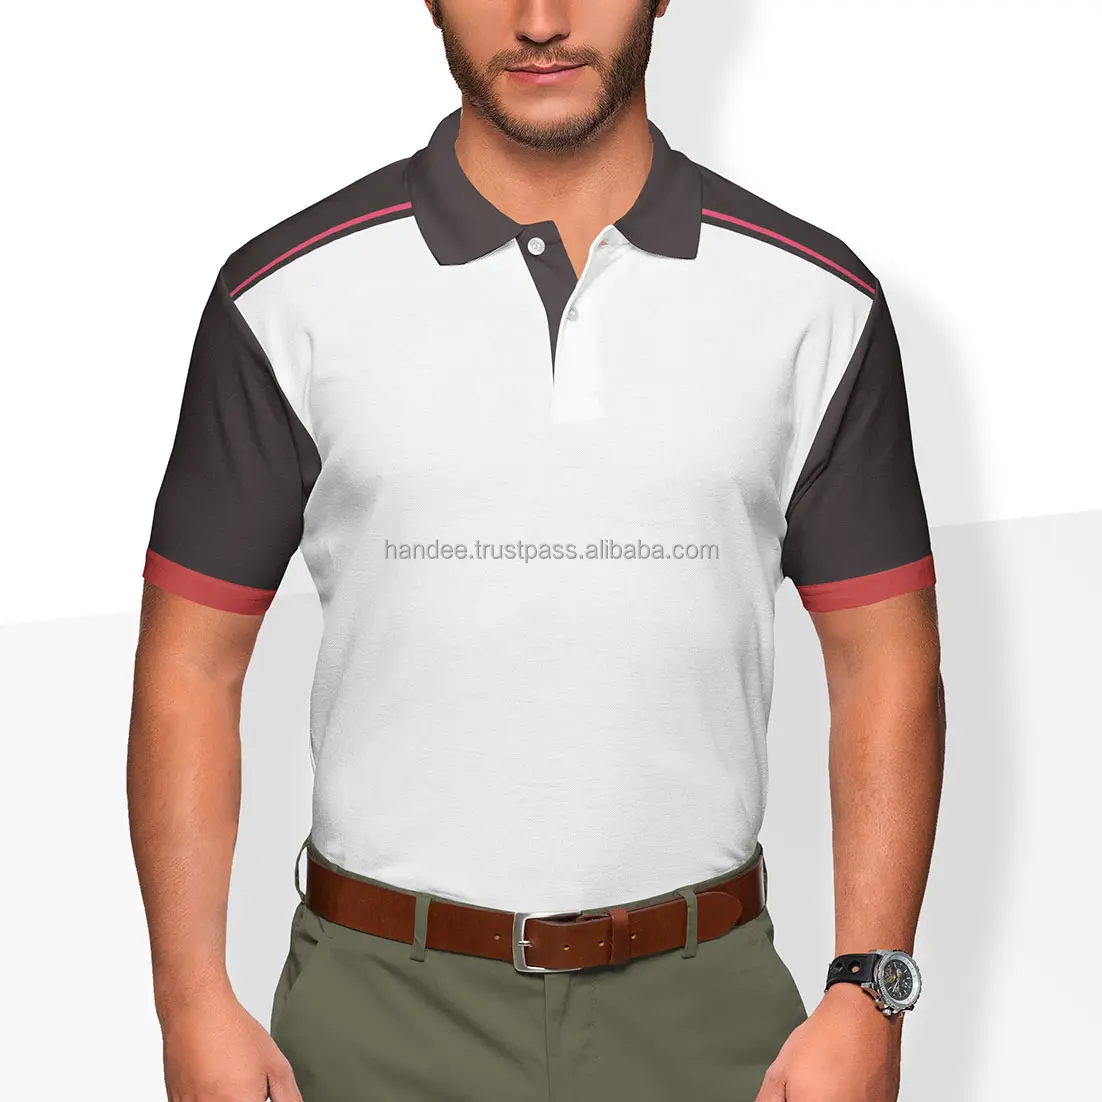 Hot Sale Amazon Choice Golf Clothing Men's Polo Shirt Plus Size Wholesale T-shirts Golf Shirts For Men Performance Cool Fabric